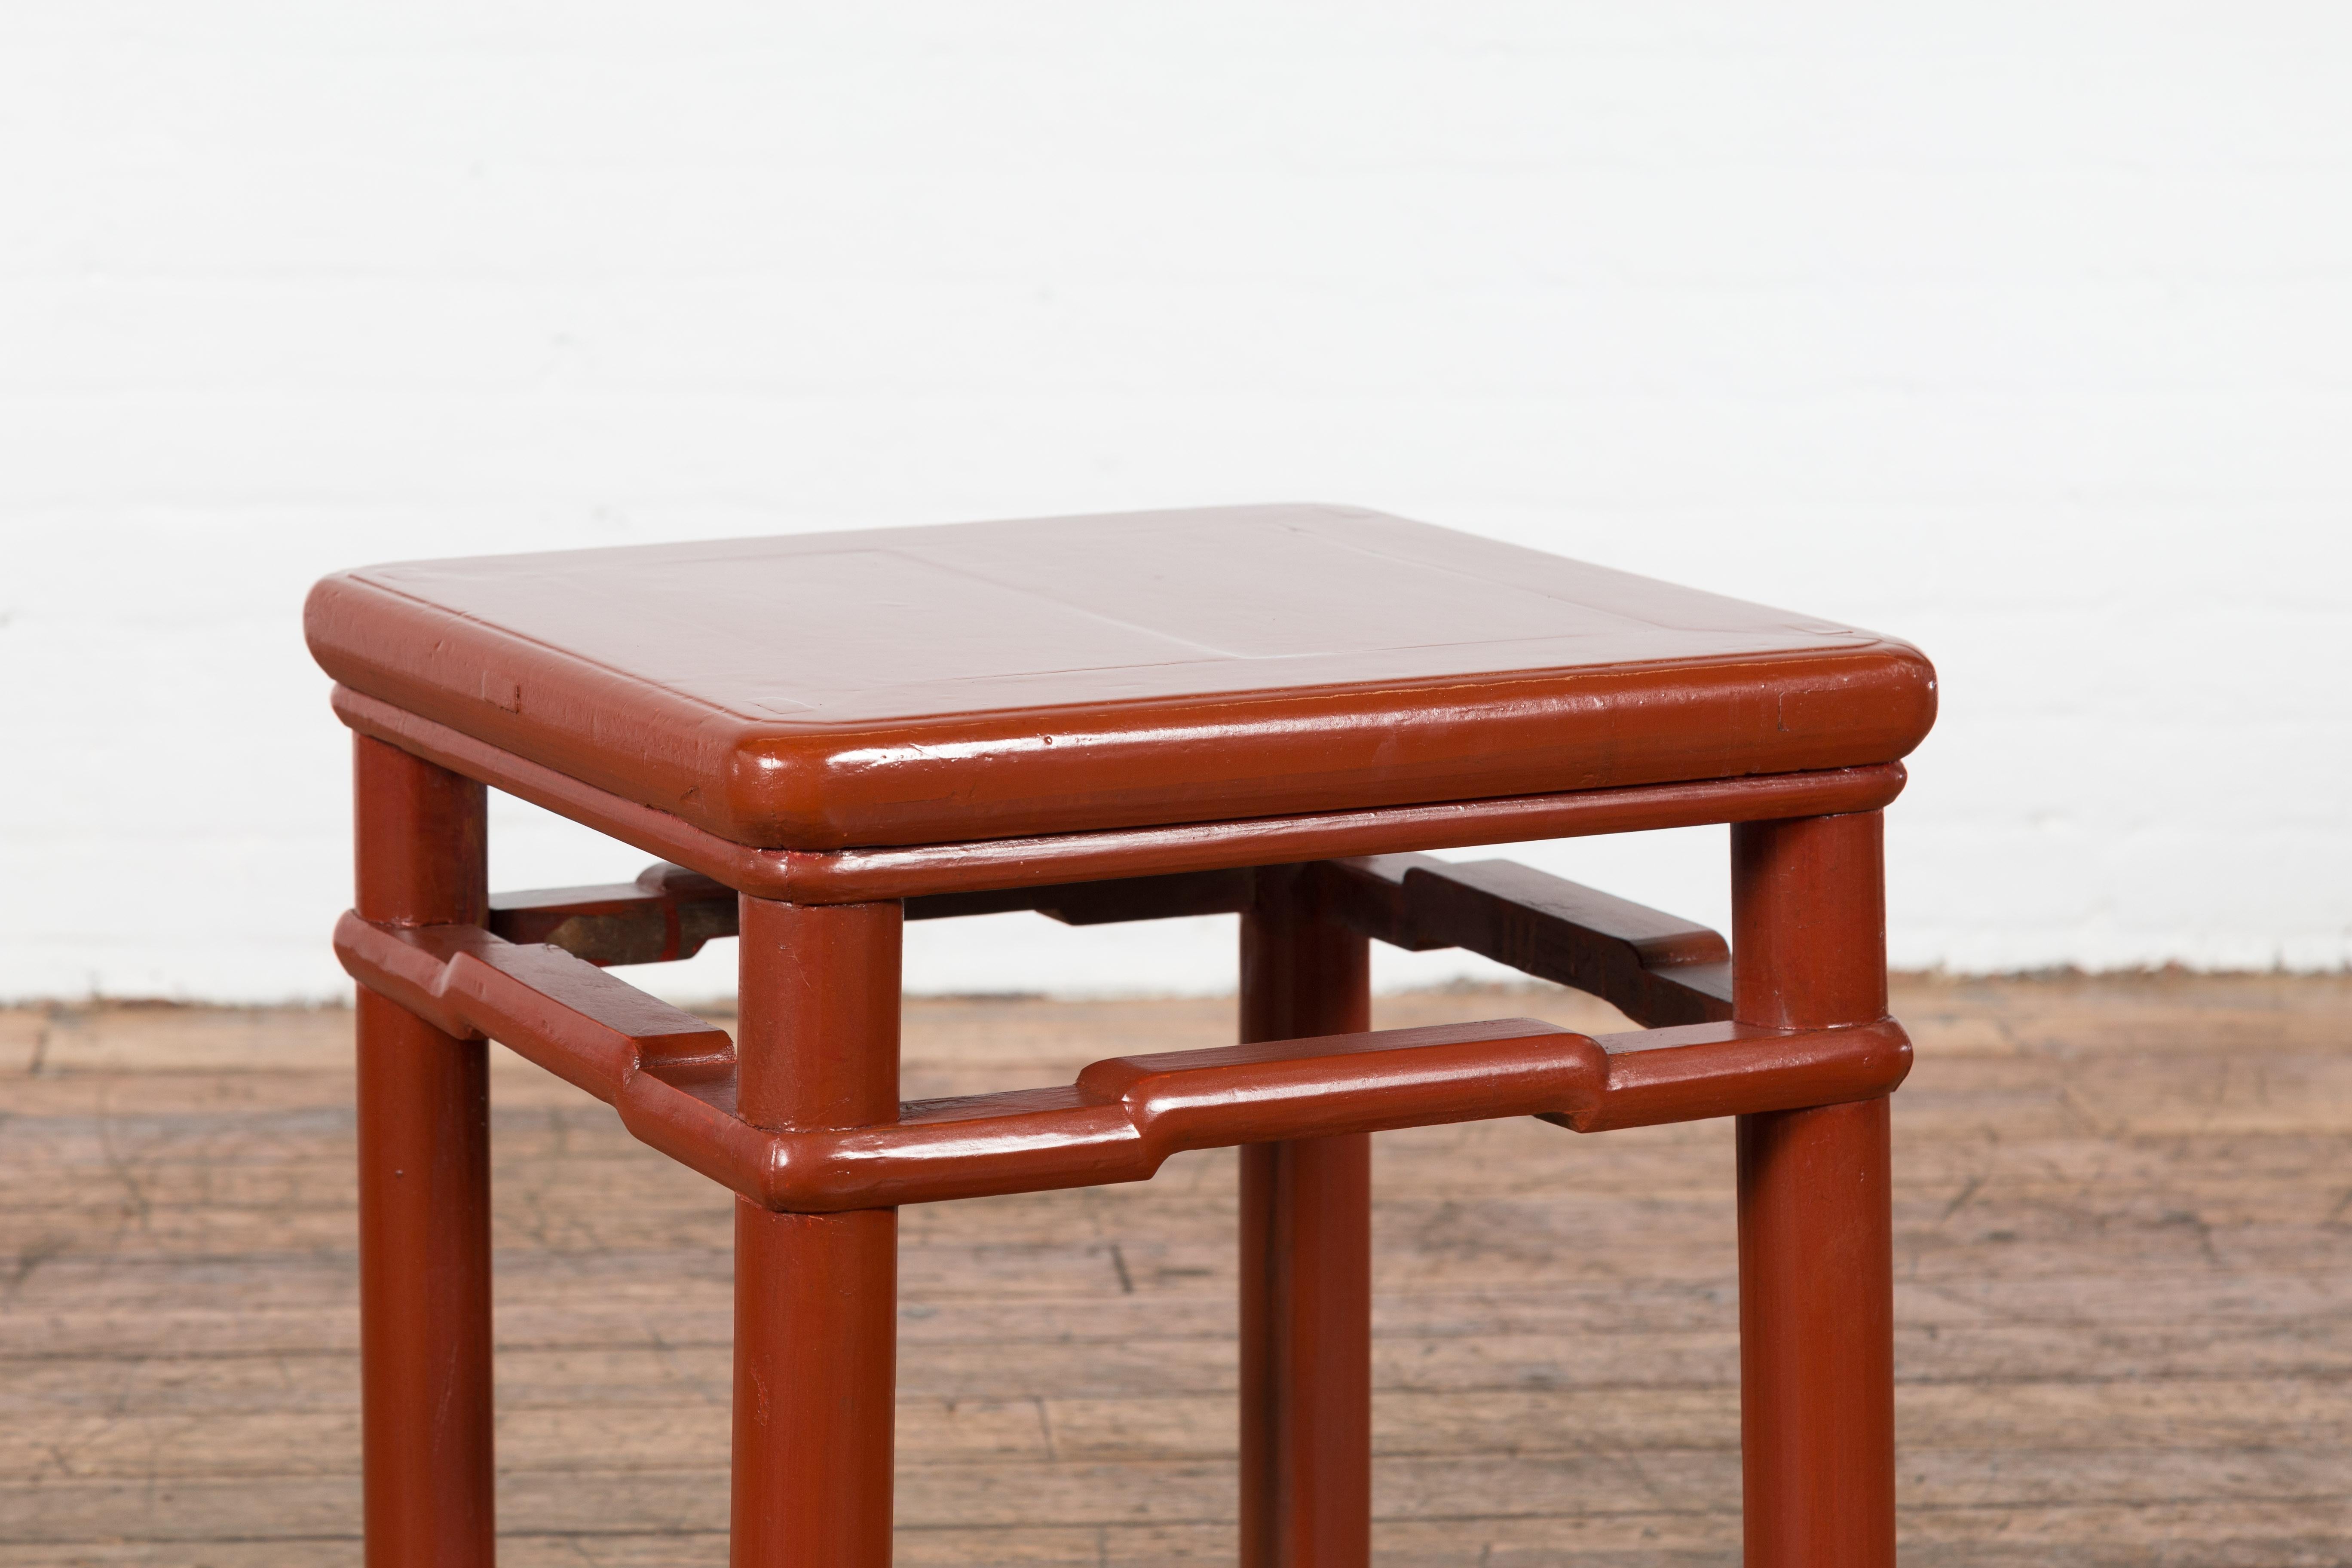 Chinese 1900s Qing Dynasty Red Lacquer Stool or Table with Humpback Stretchers For Sale 8